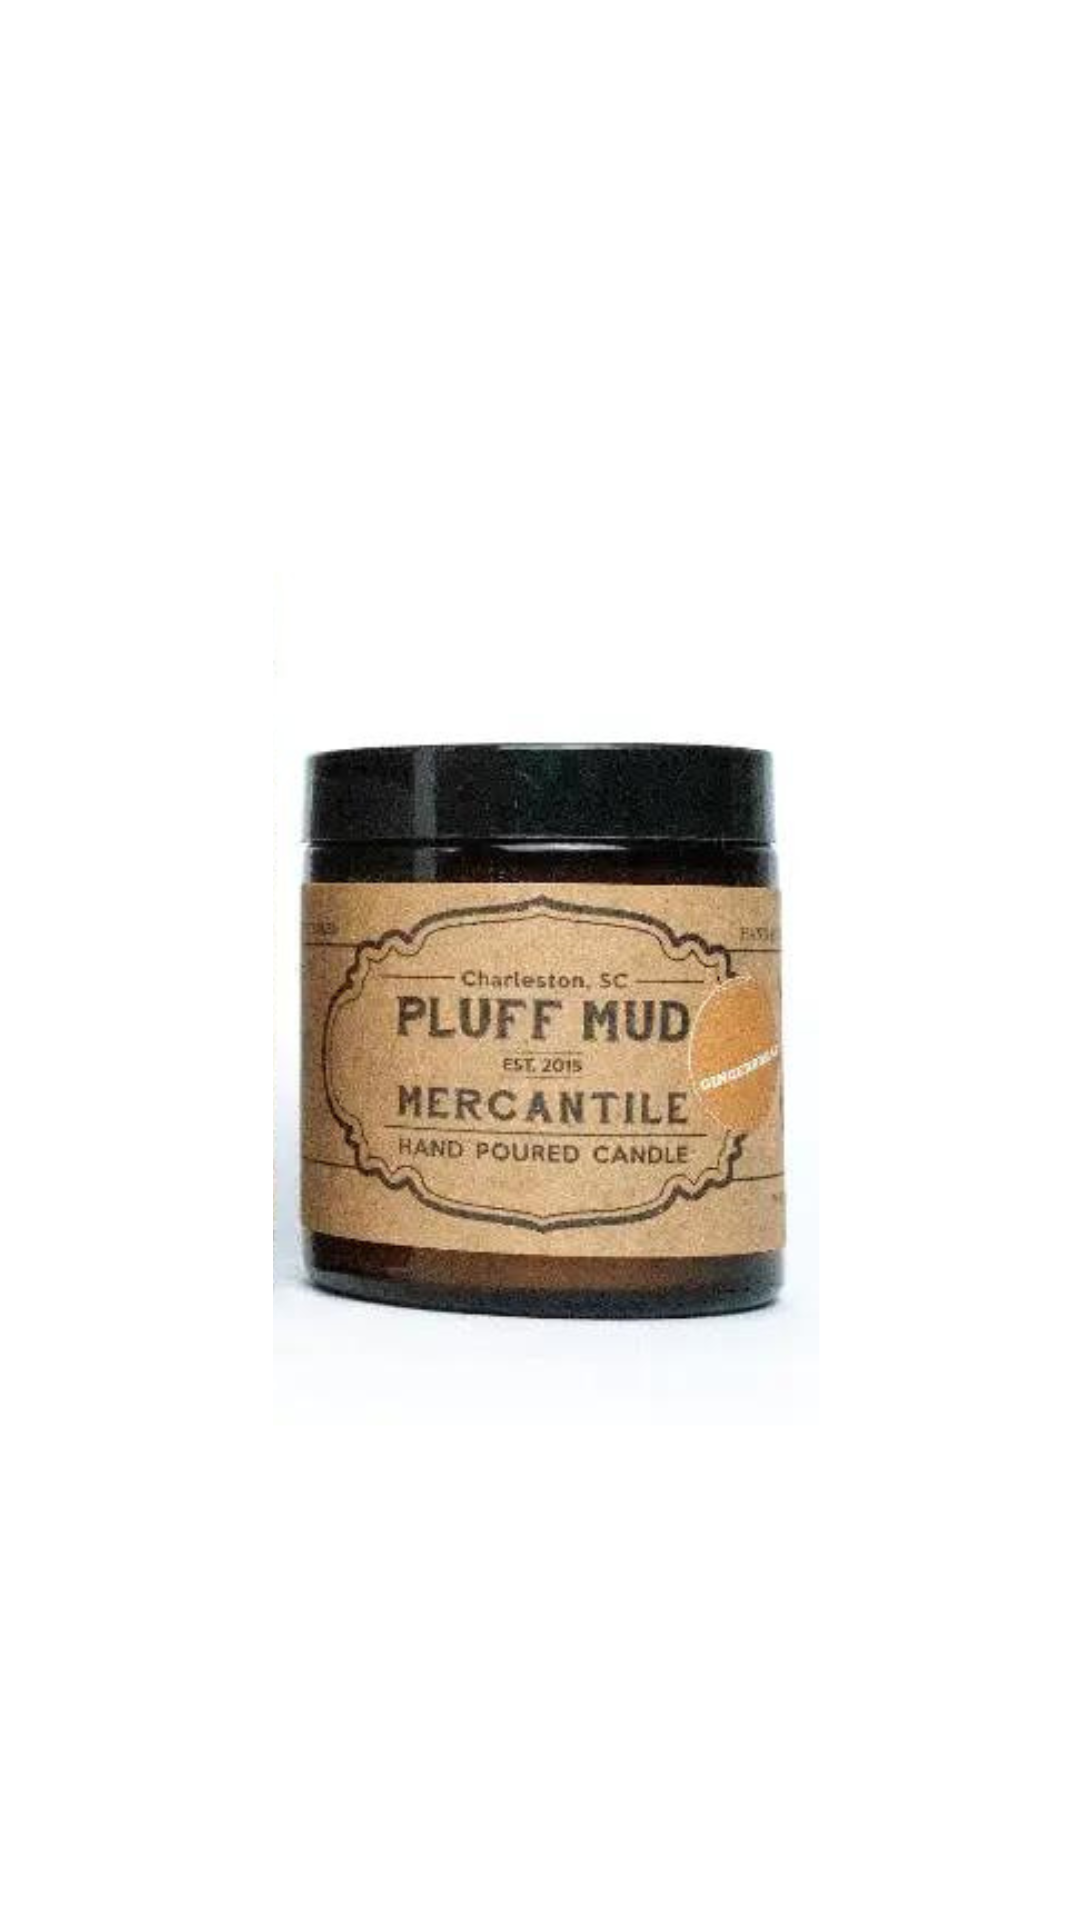 Boat Deck Hand Poured Soy Candle - Pluff Mud Mercantile